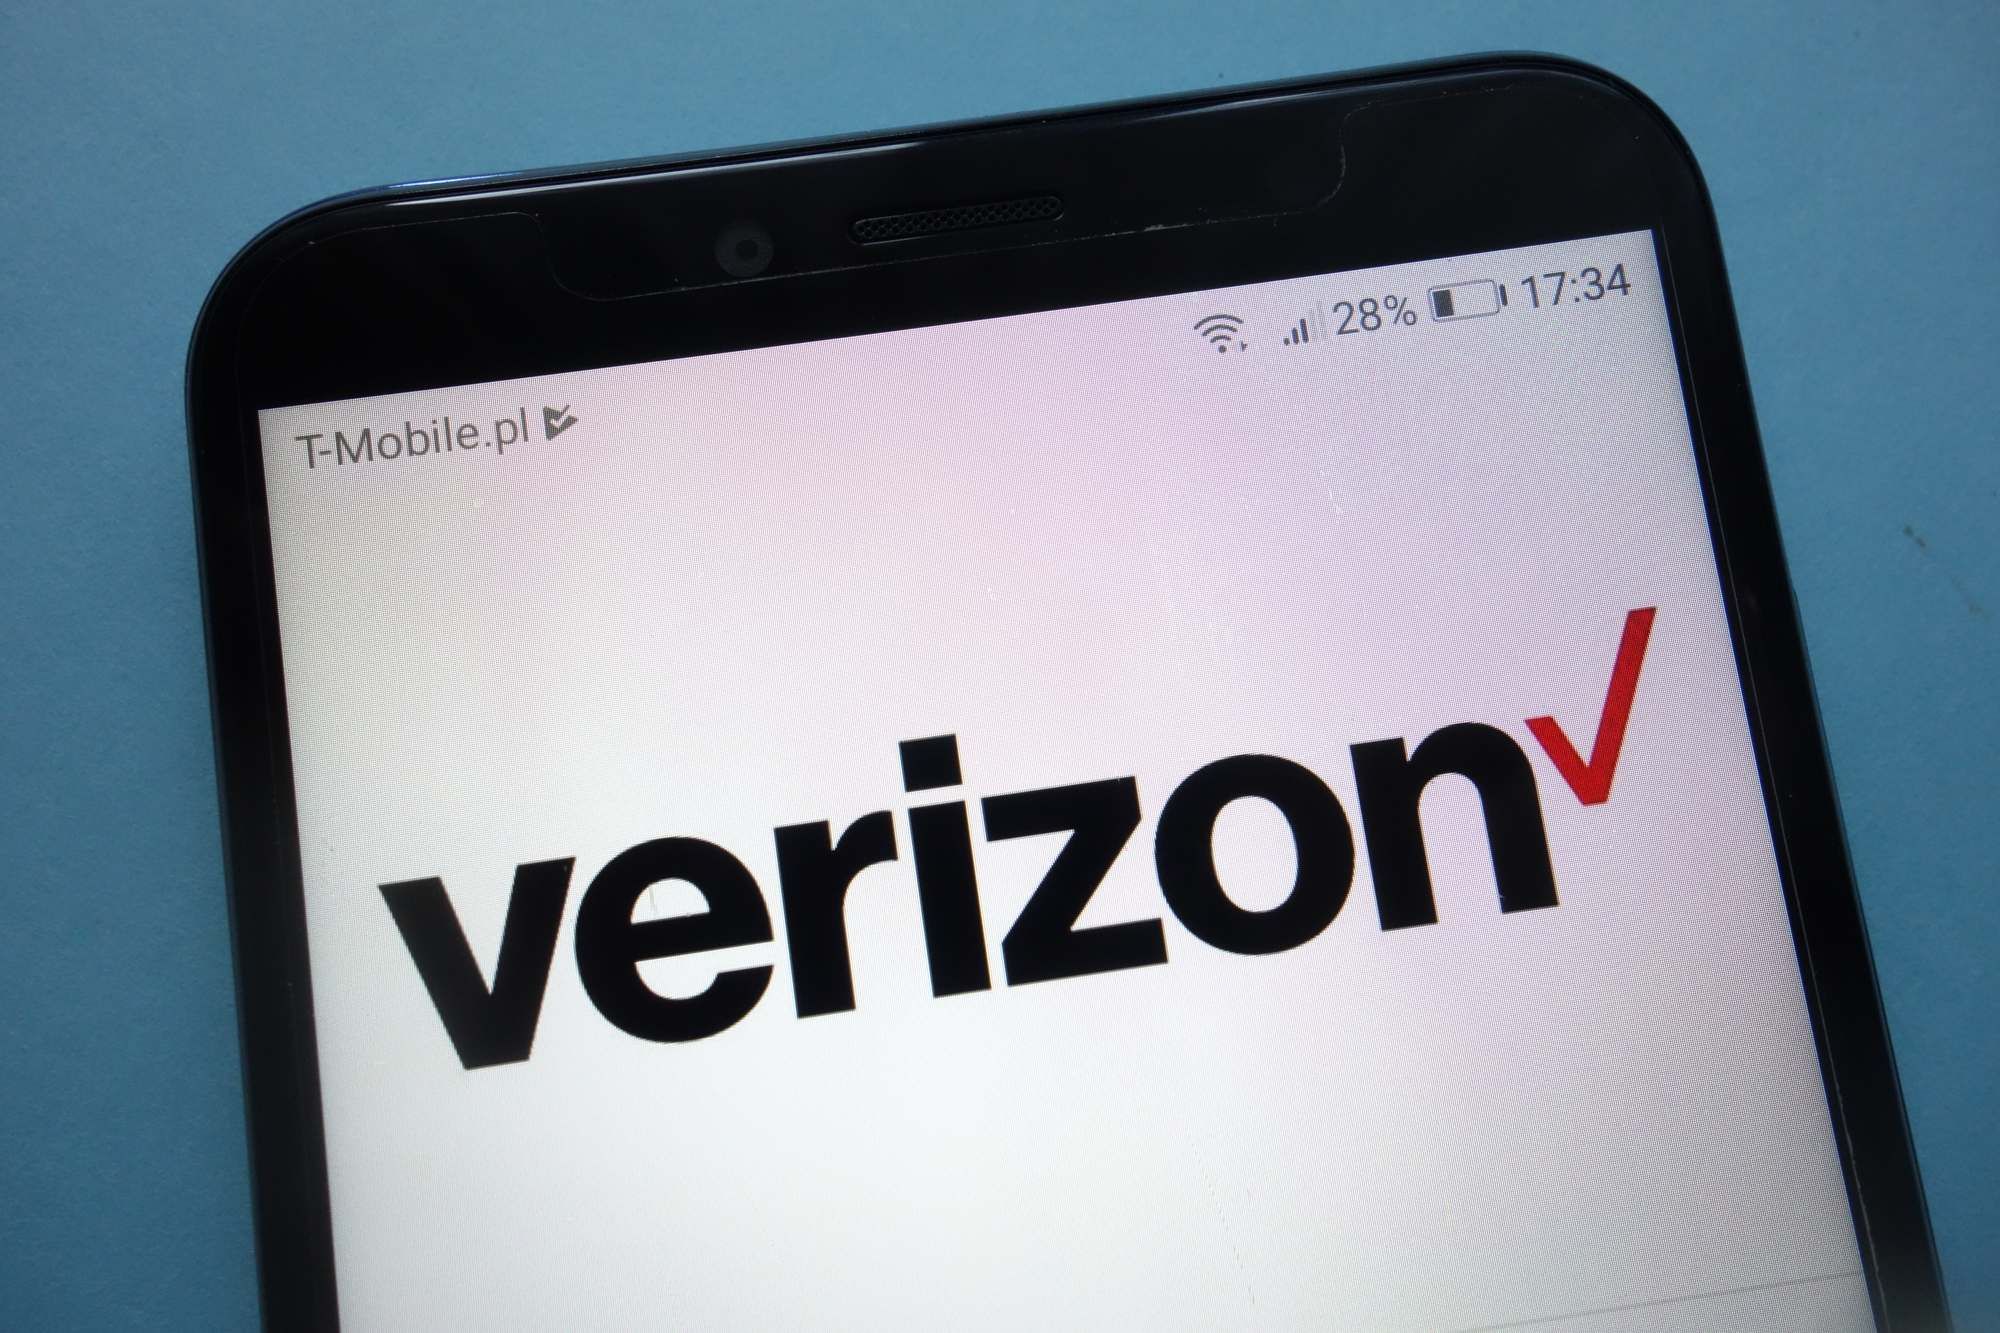 Verizon Sneaks Extra Charges into Customer Bills, Class Action Lawsuit